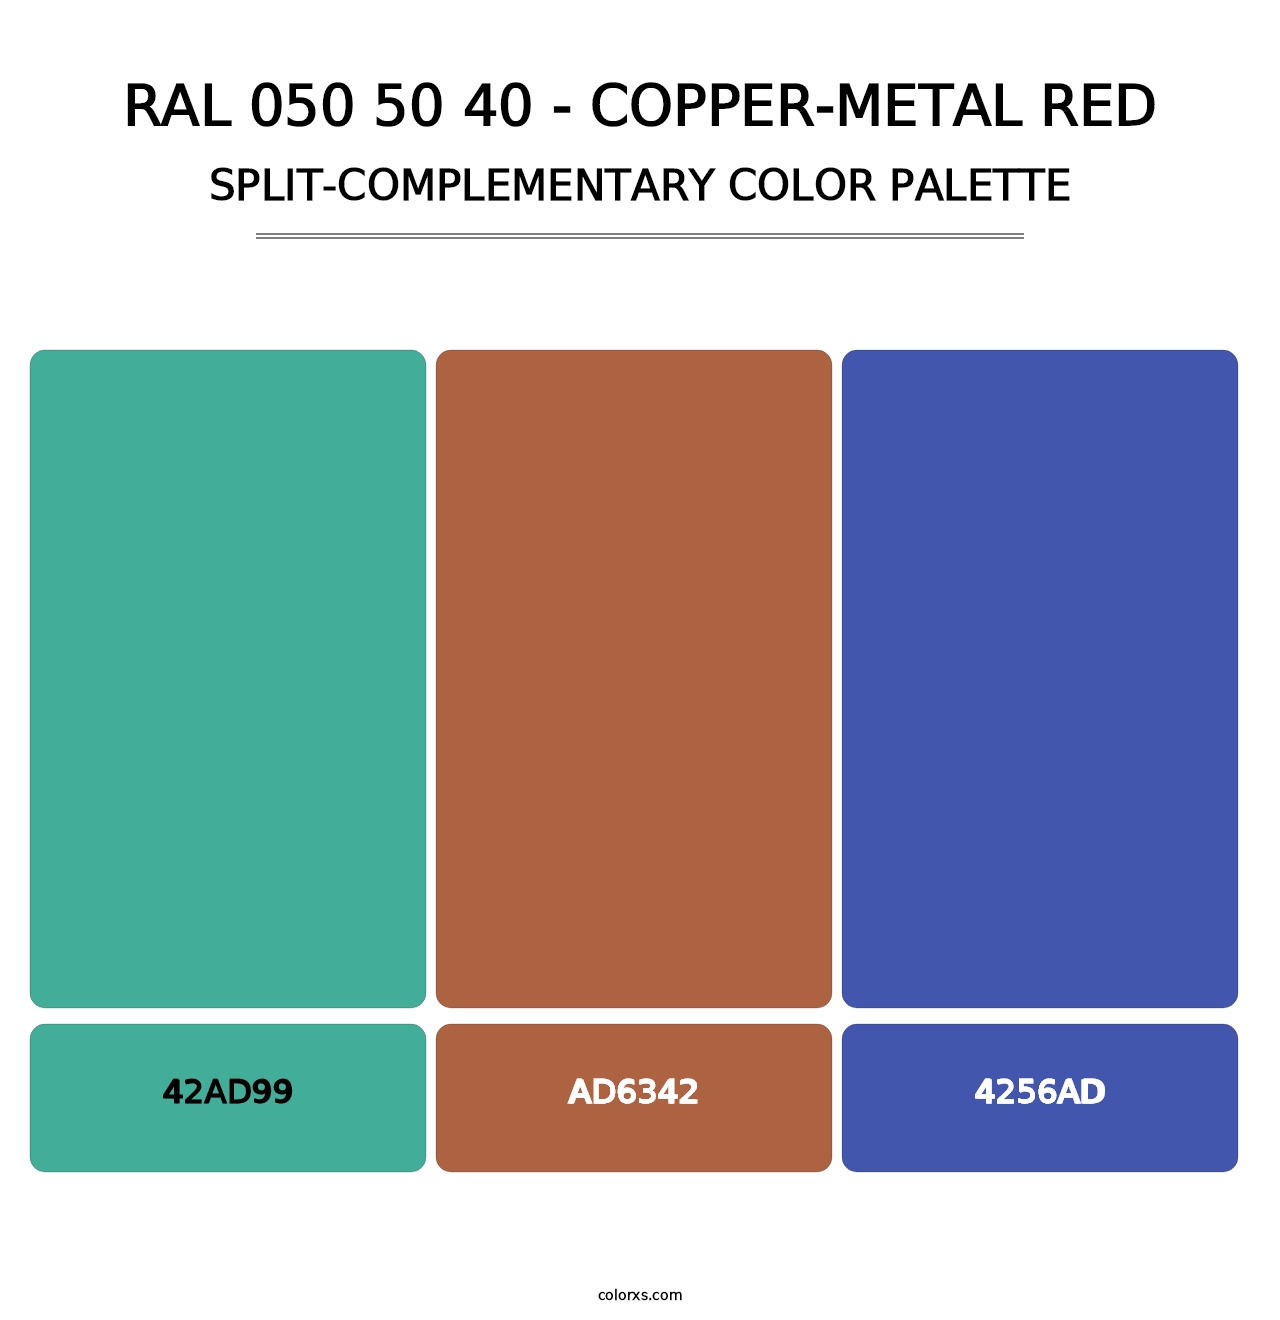 RAL 050 50 40 - Copper-Metal Red - Split-Complementary Color Palette